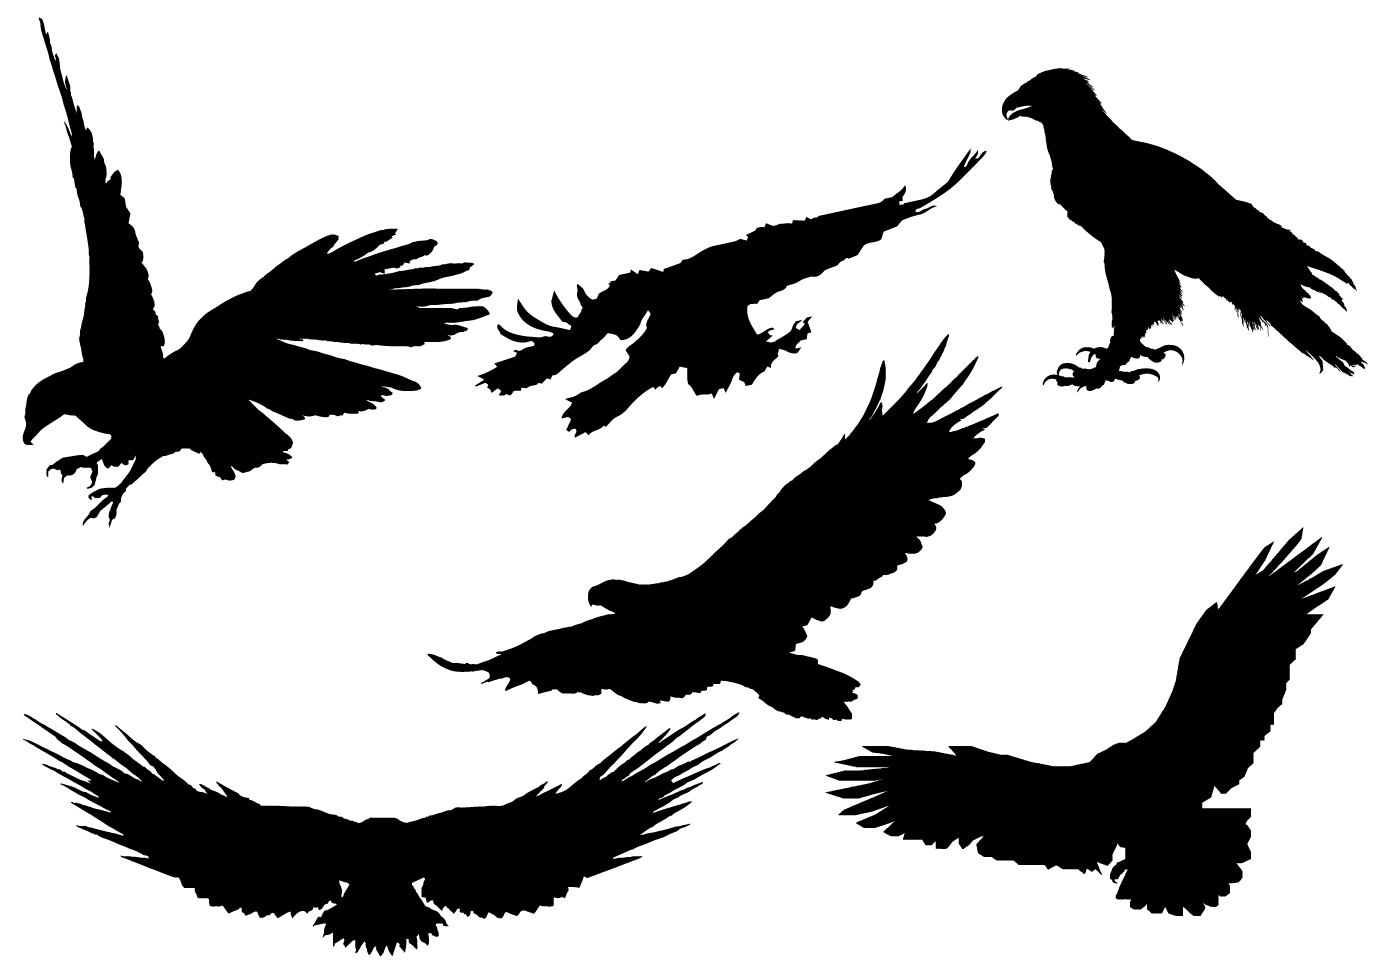 Free Eagle Silhouette Vector - Download Free Vector Art, Stock Graphics & Images